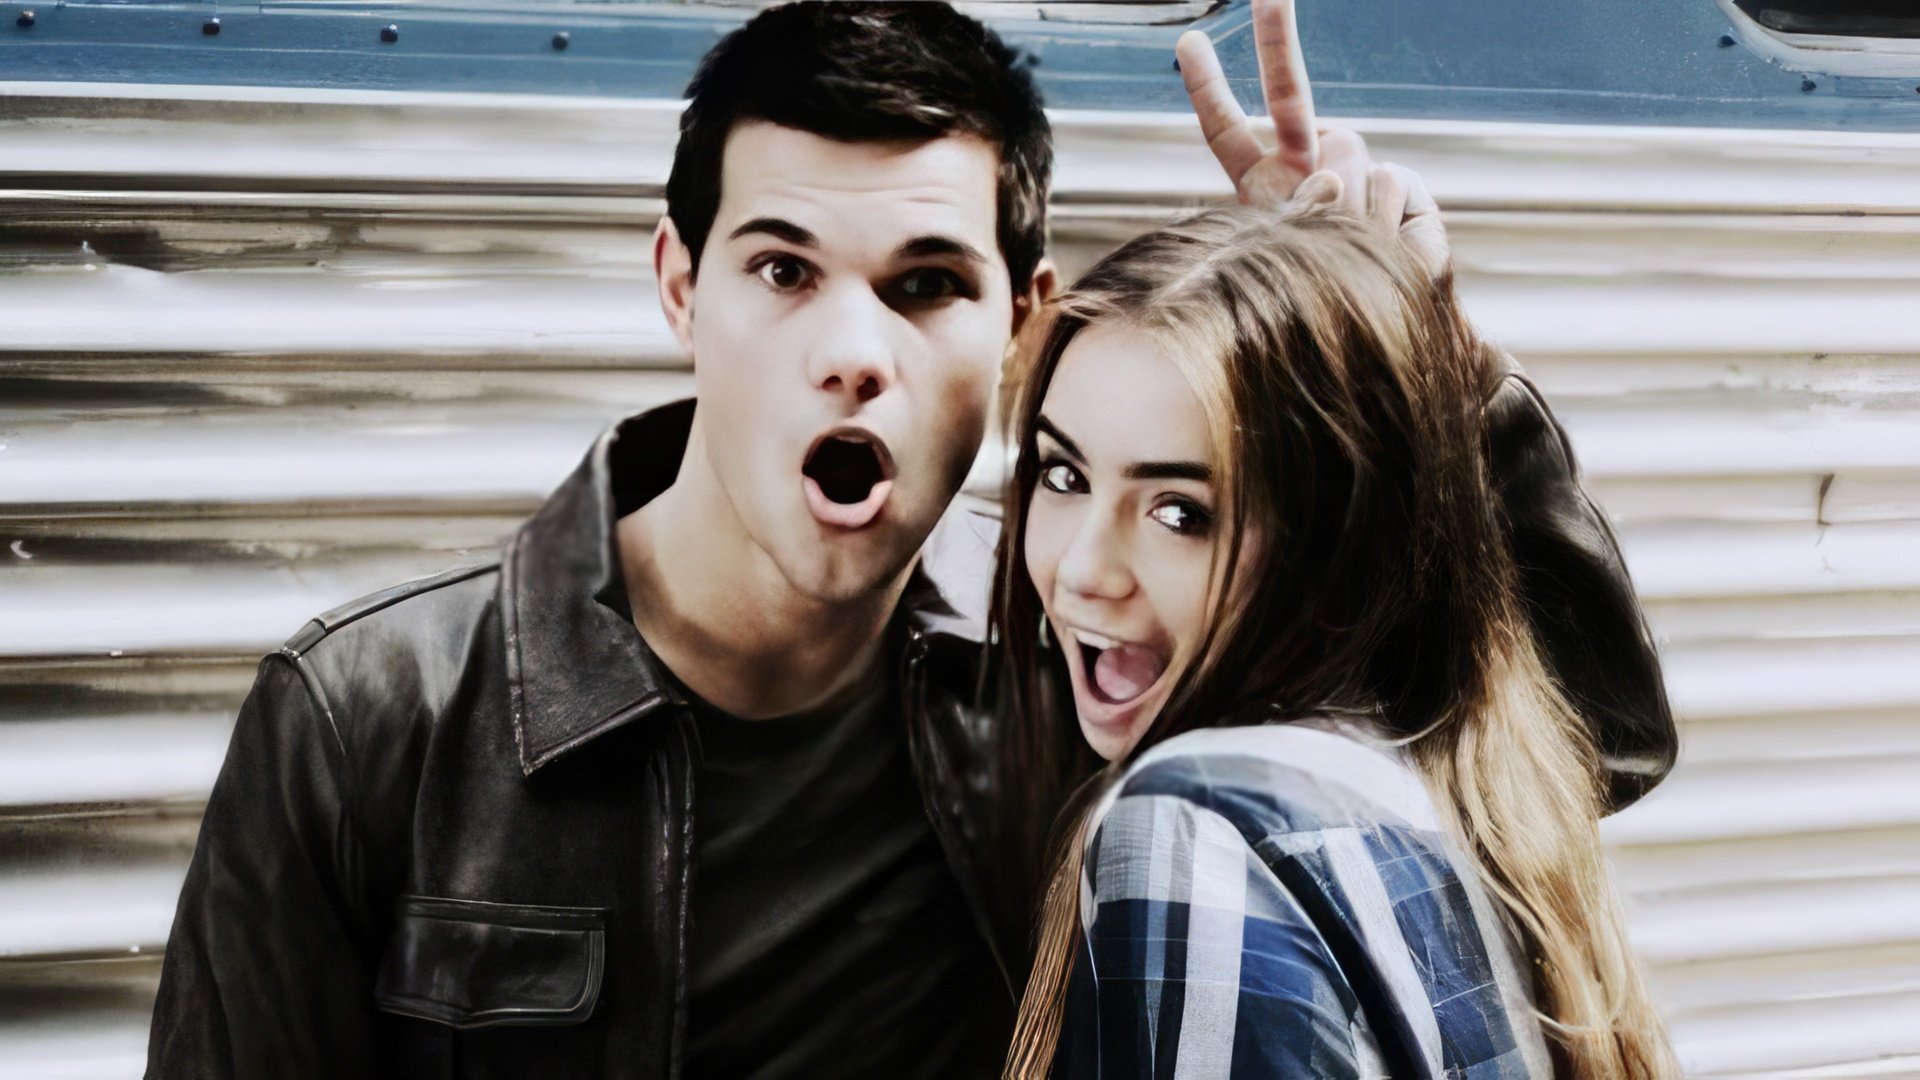 Taylor Lautner and Lily Collins dated